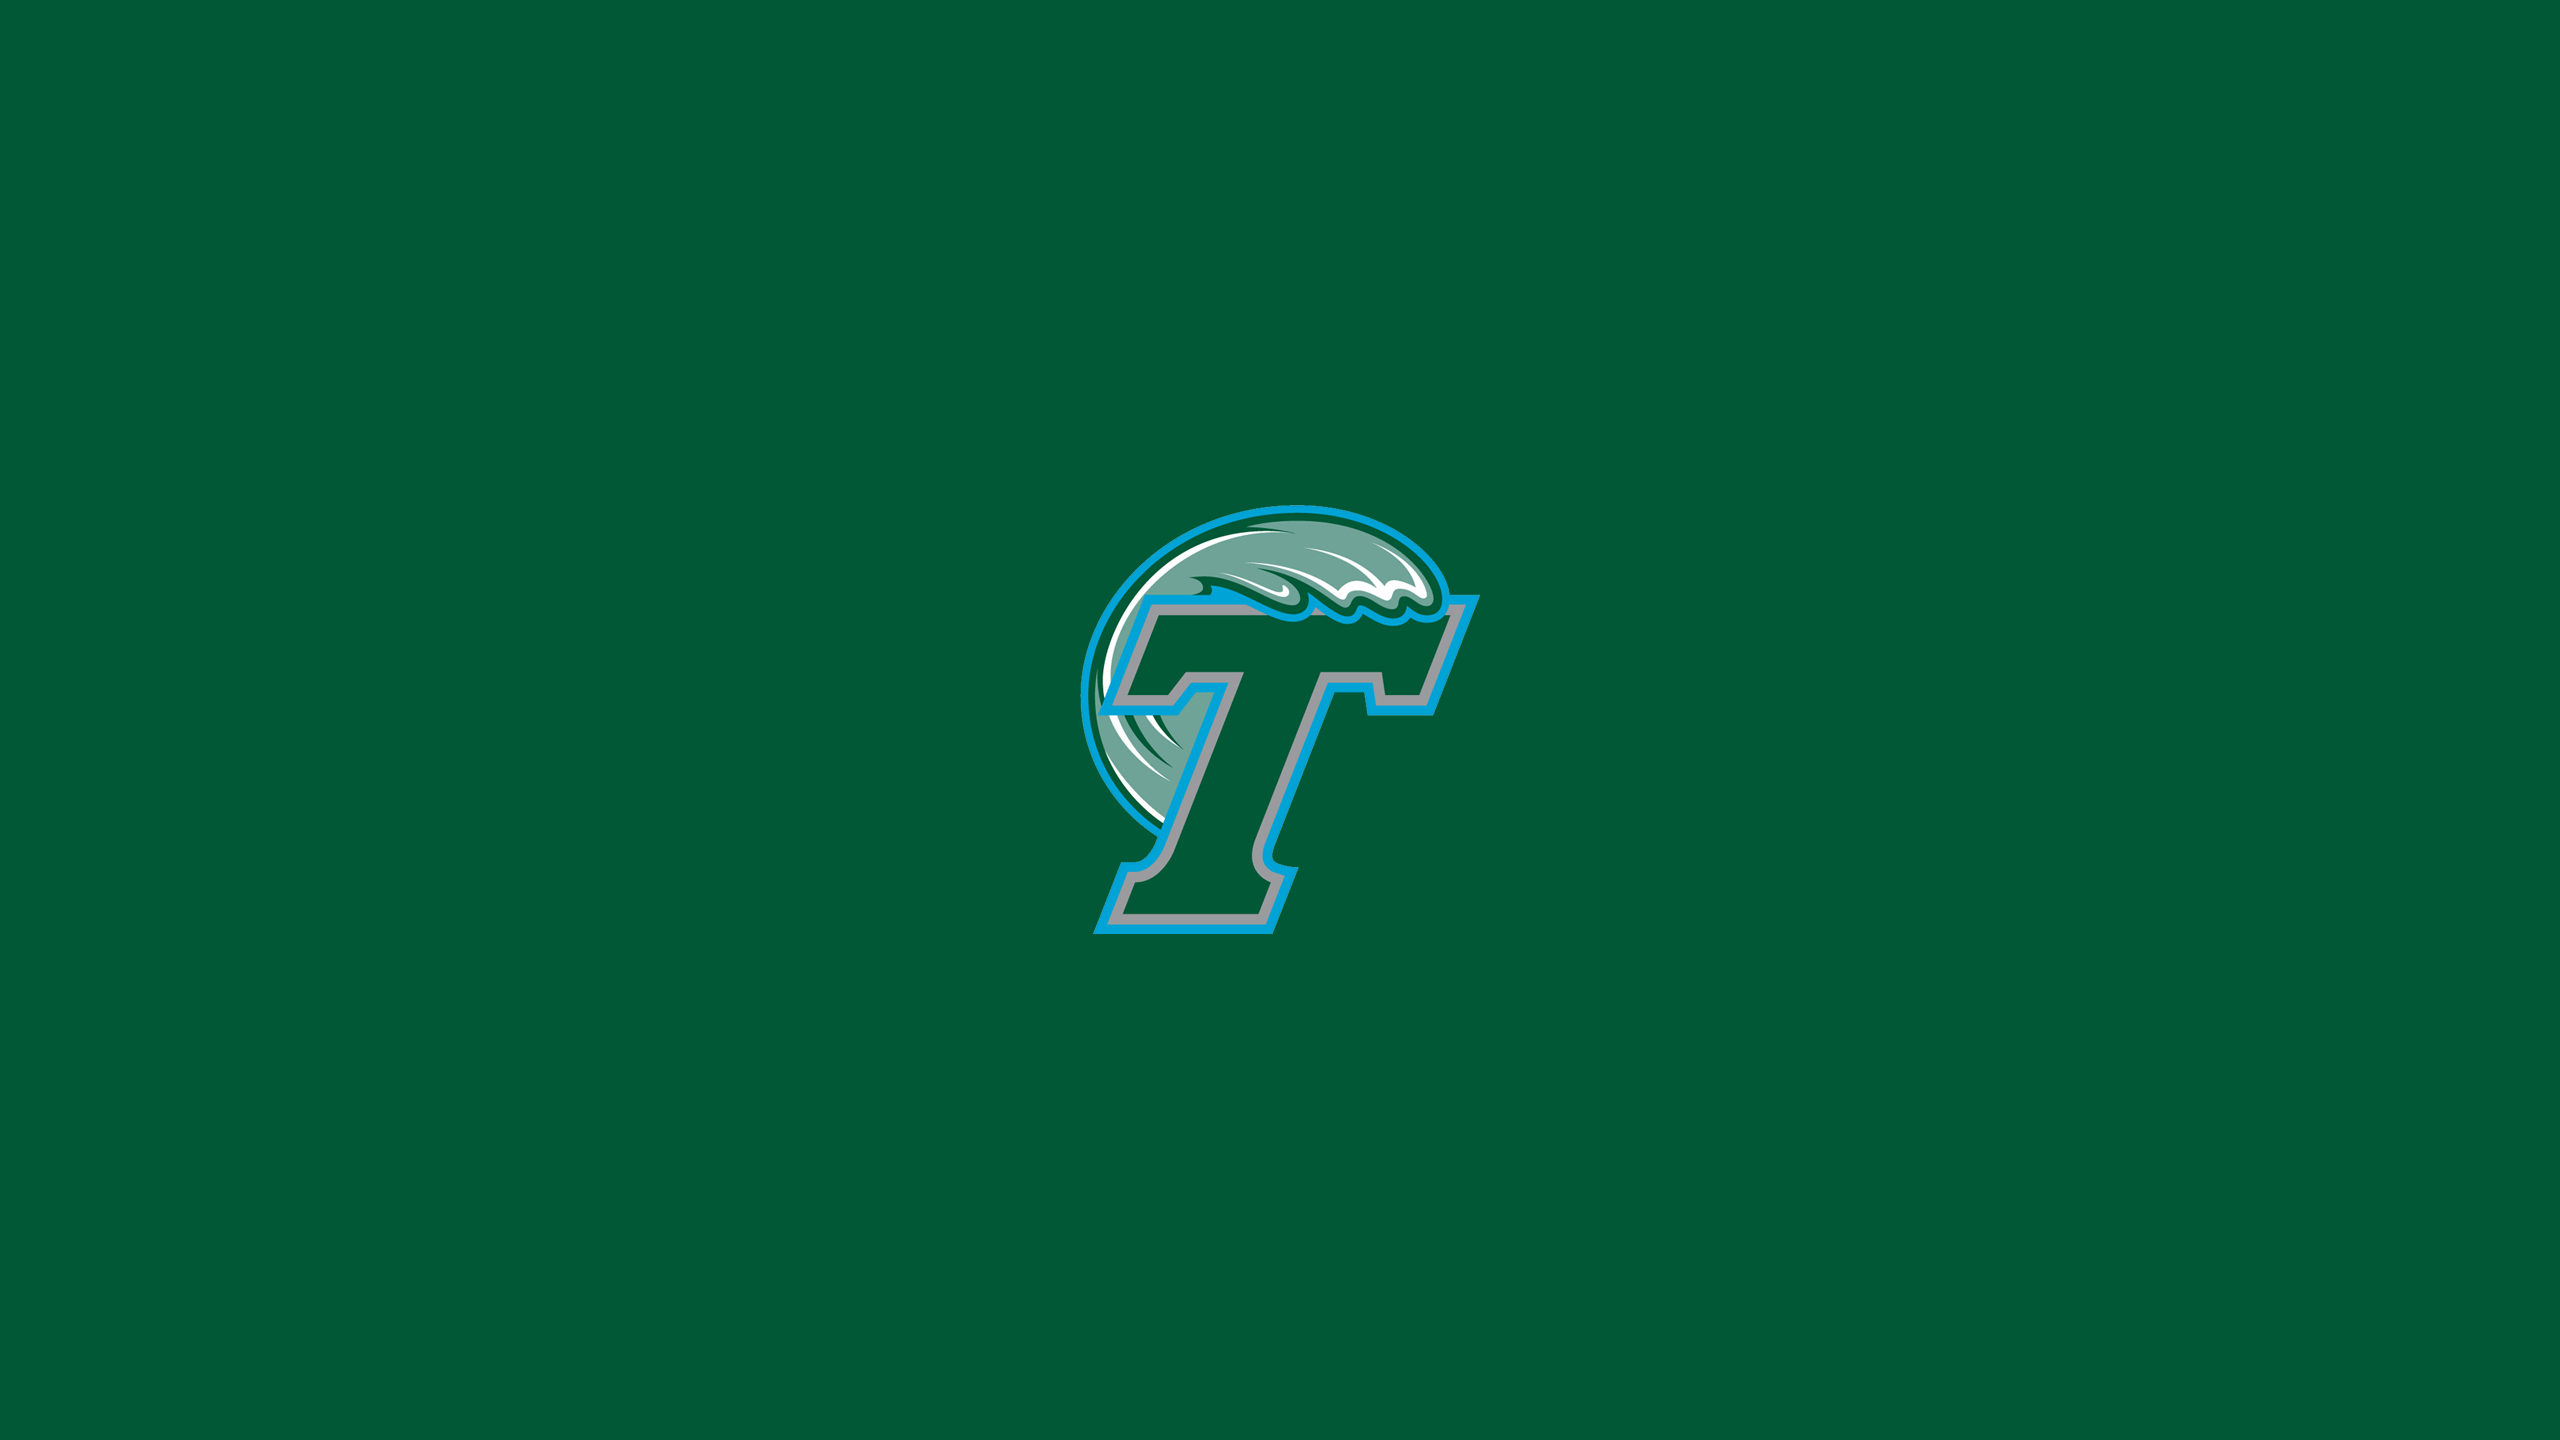 Tulane Green Wave Football - NCAAF - Square Bettor